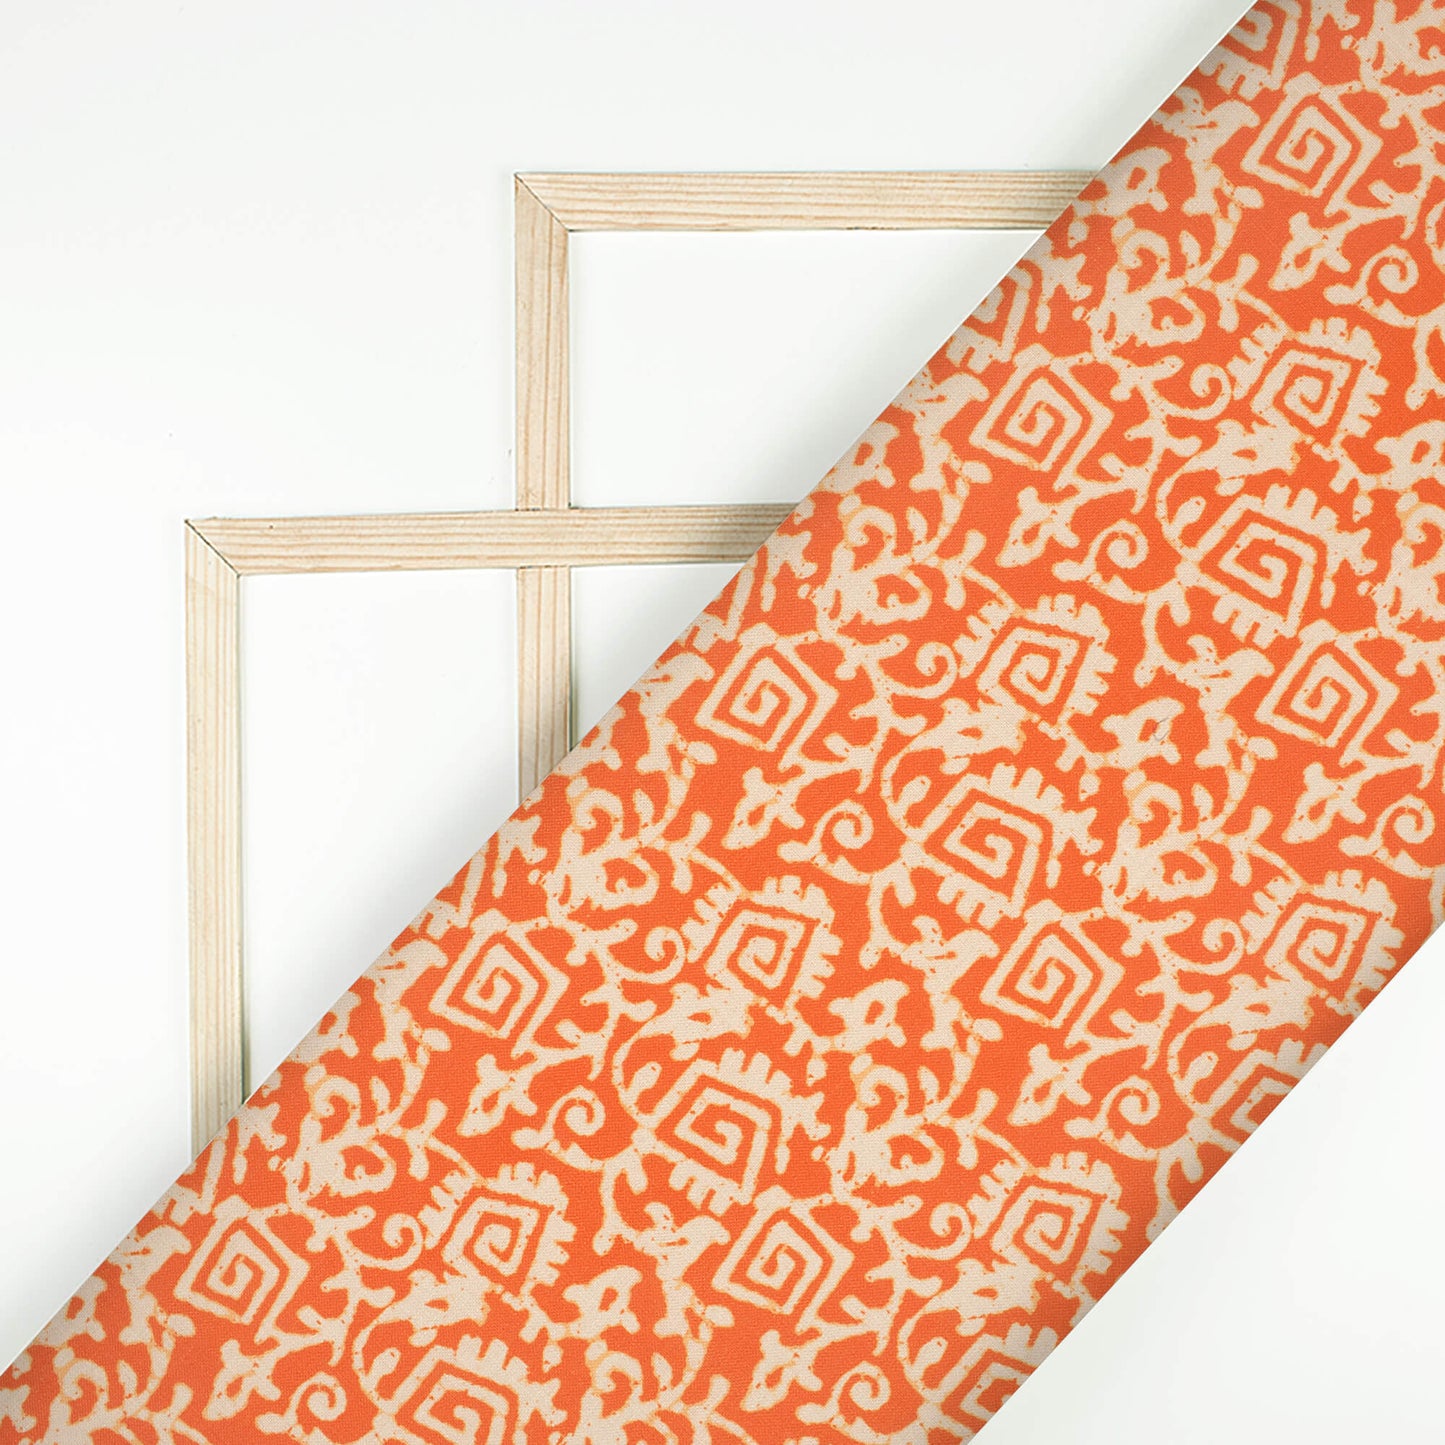 Blaze Orange And Off White Quirky Pattern Digital Print Linen Textured Fabric (Width 56 Inches)